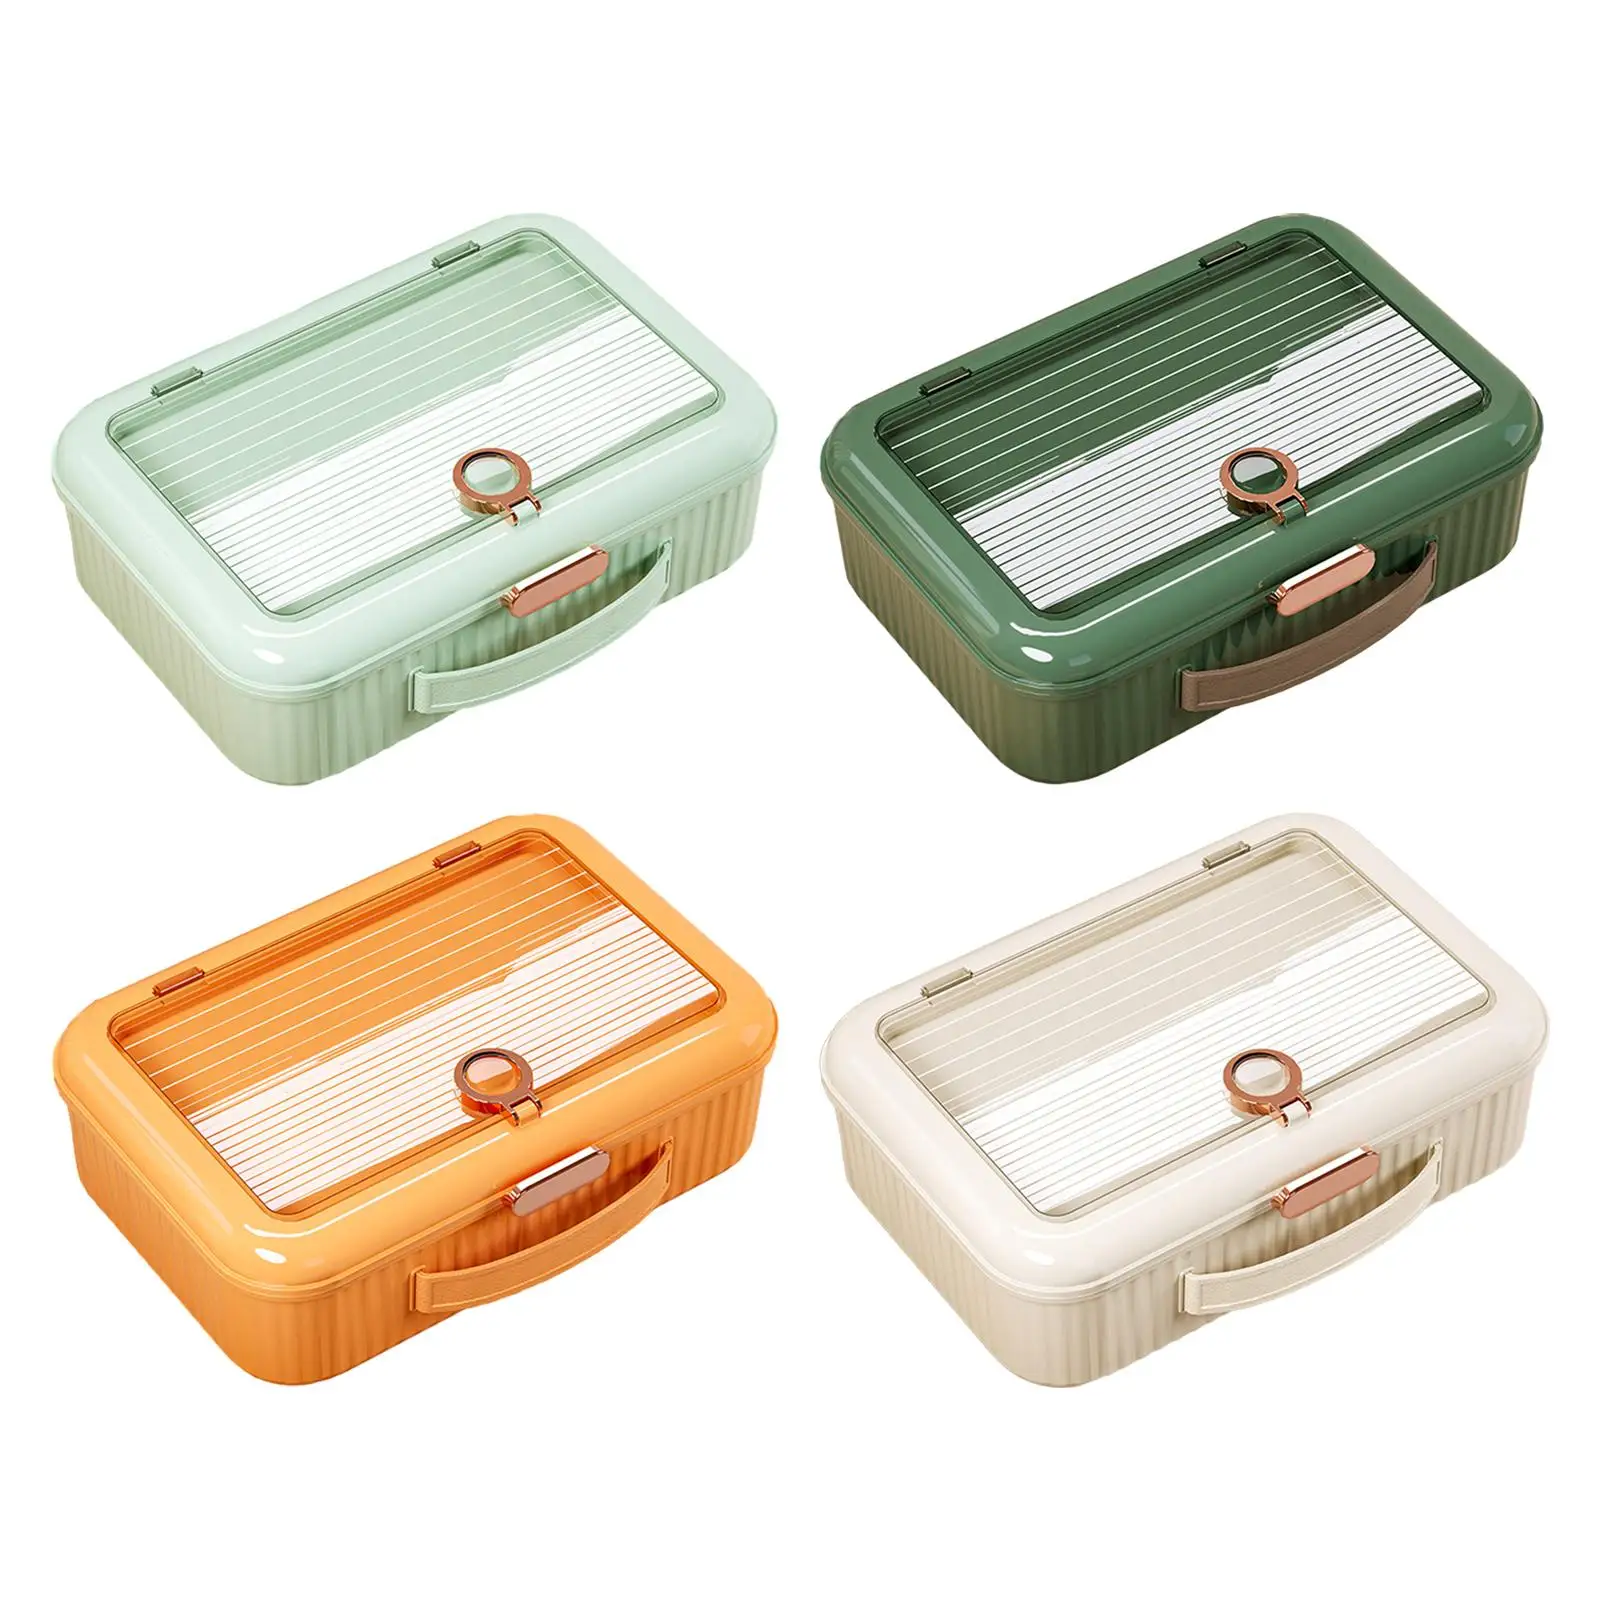 Document Storage Box with Handle Large Capacity Waterproof Document Box File Organizer for Files Certificates Travel Carry Bag